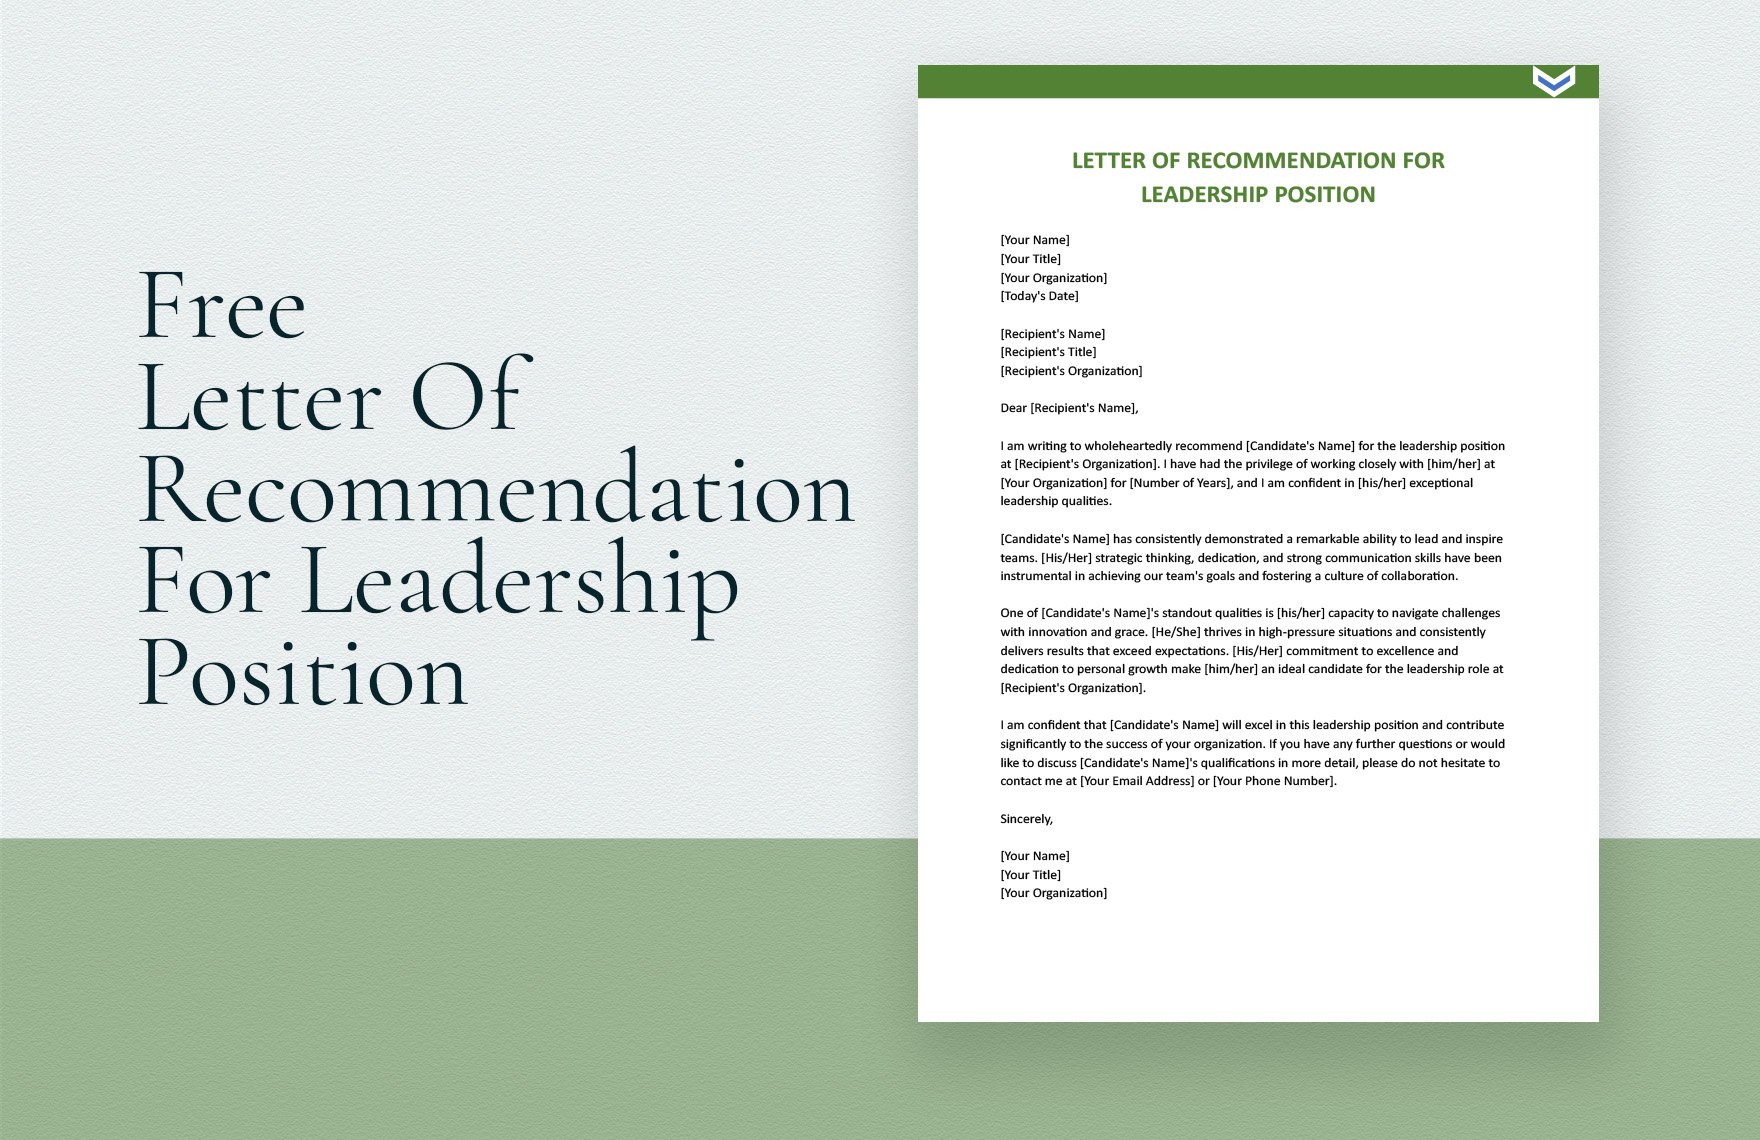 Letter Of Recommendation For Leadership Position